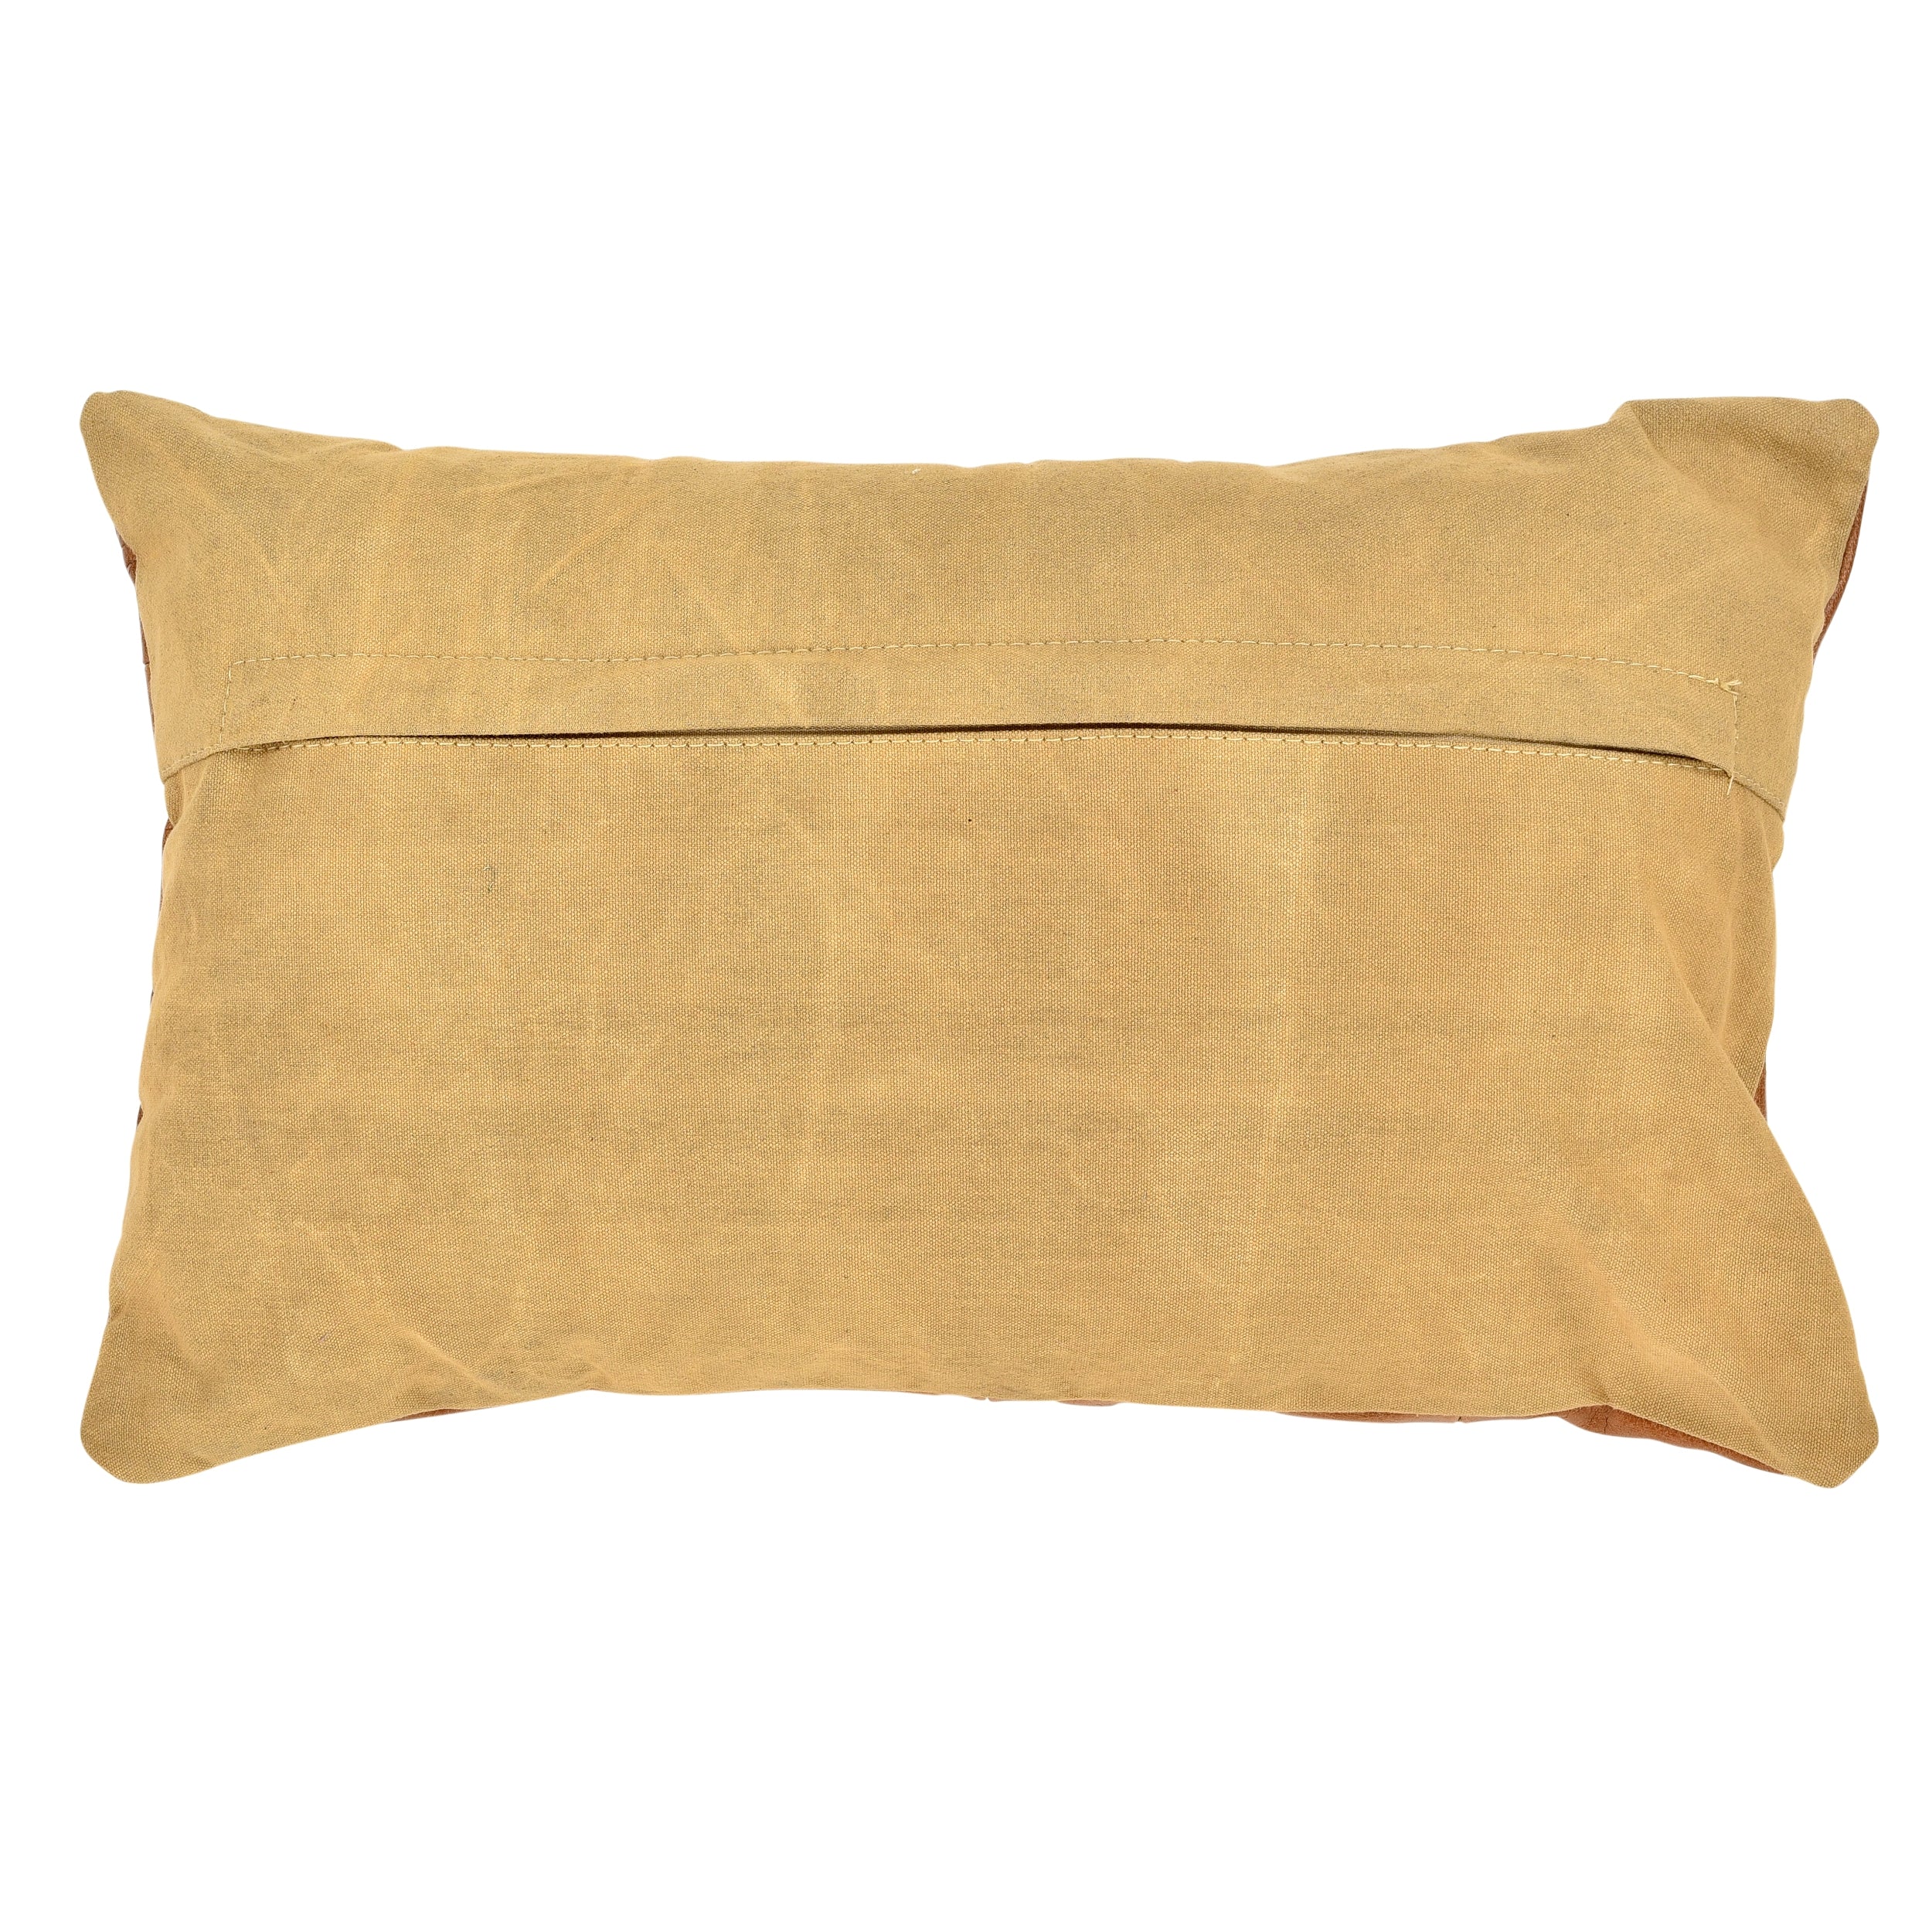 Charolette Leather Cushion, Tobacco